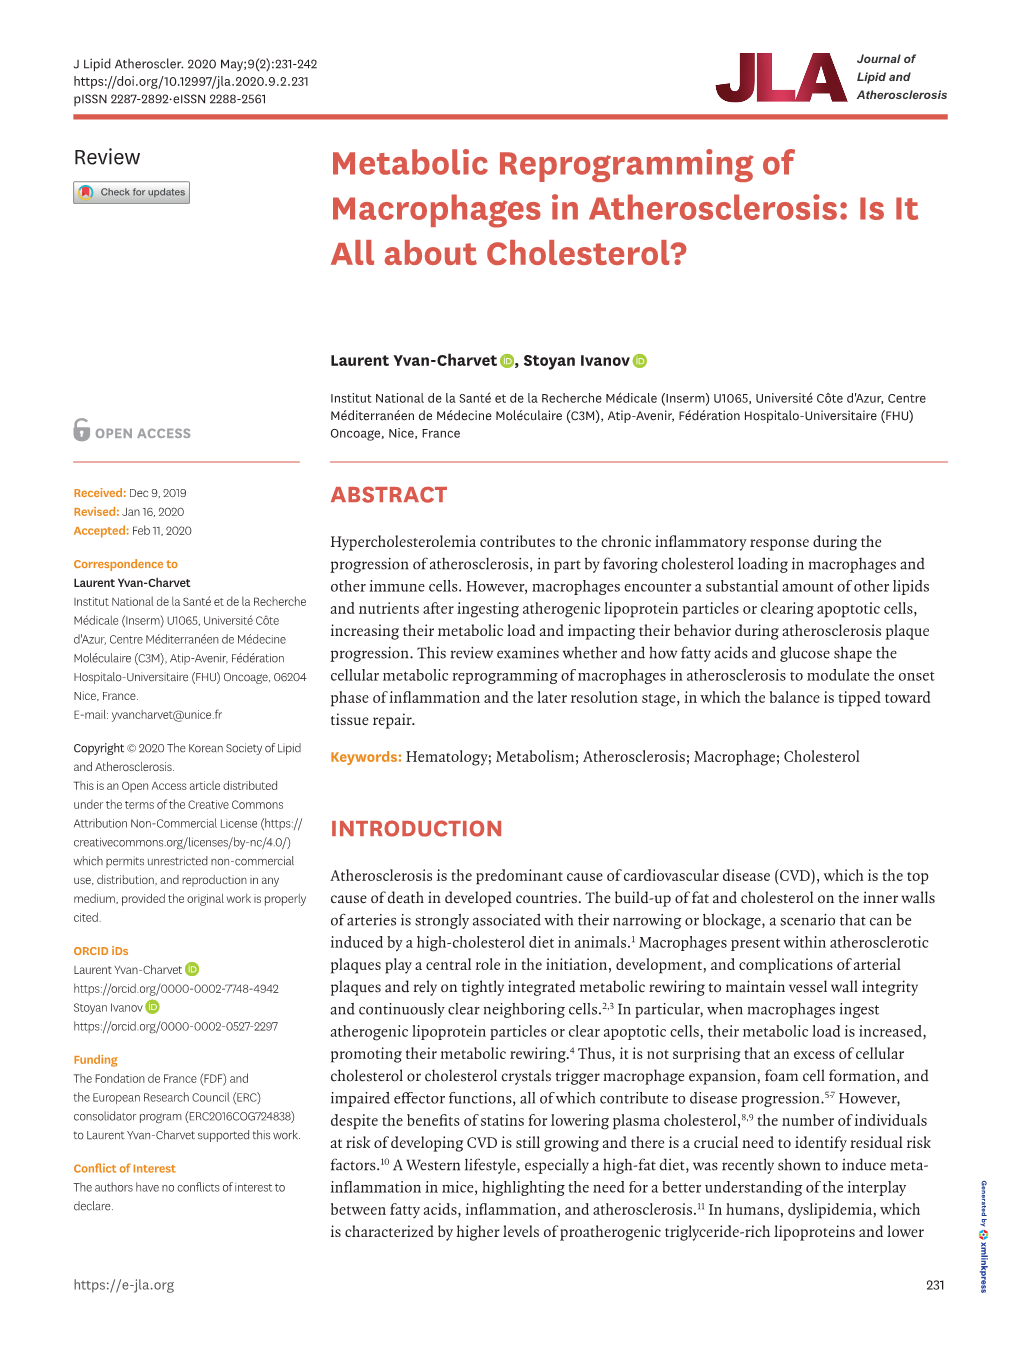 Metabolic Reprogramming of Macrophages in Atherosclerosis: Is It All About Cholesterol?